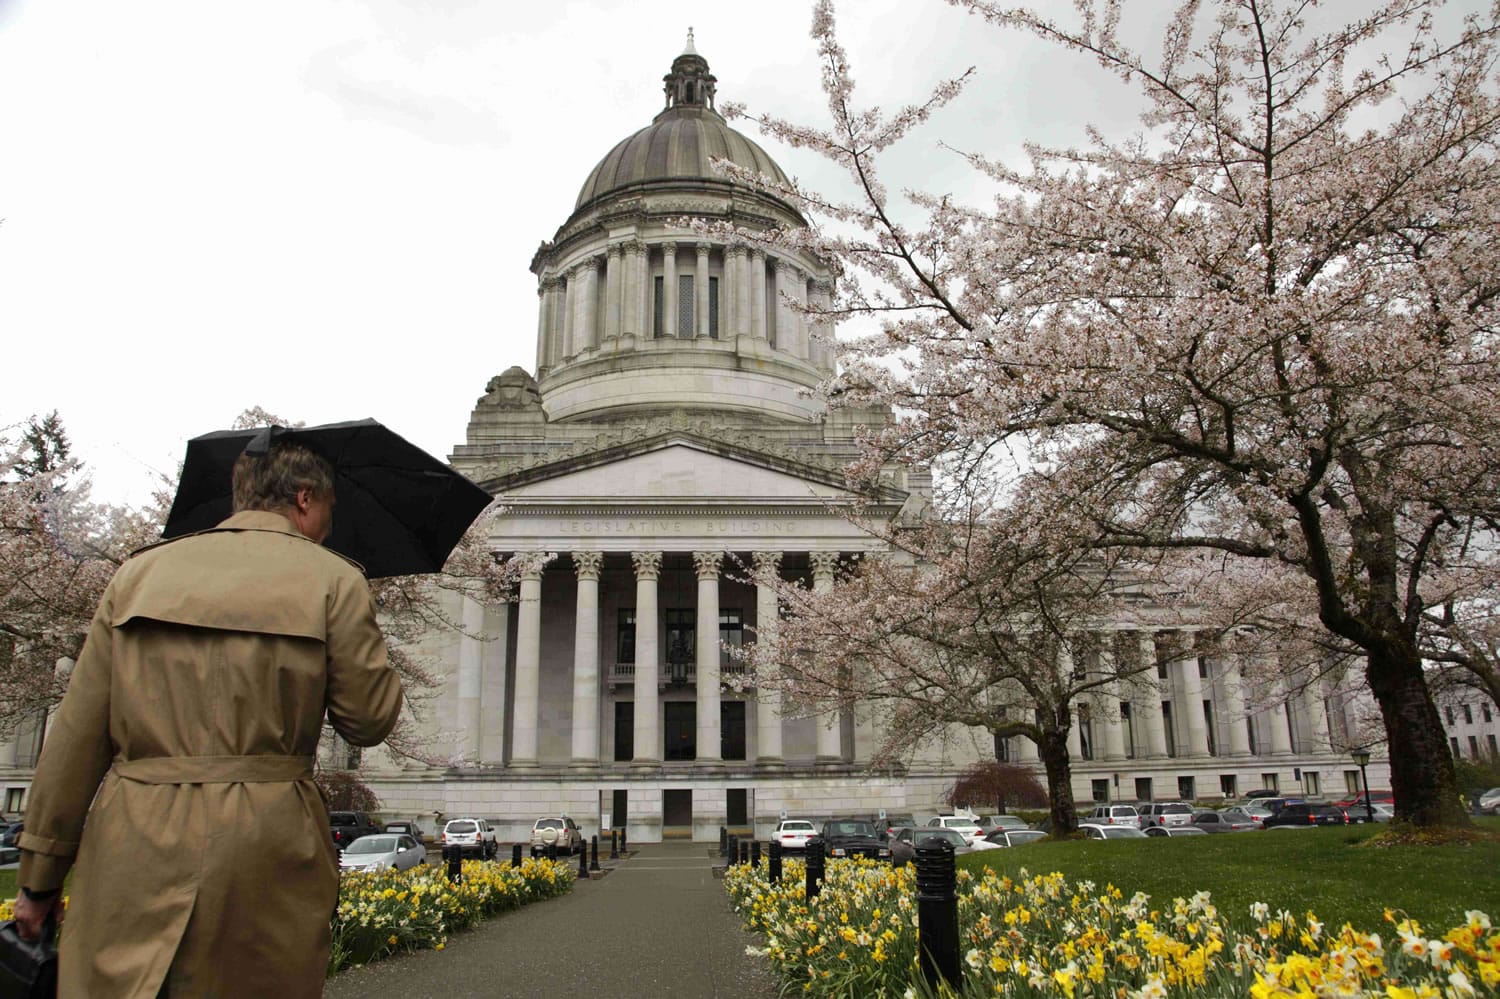 Spring is in bloom at the Capitol campus, but lawmakers still have a budget to pass.